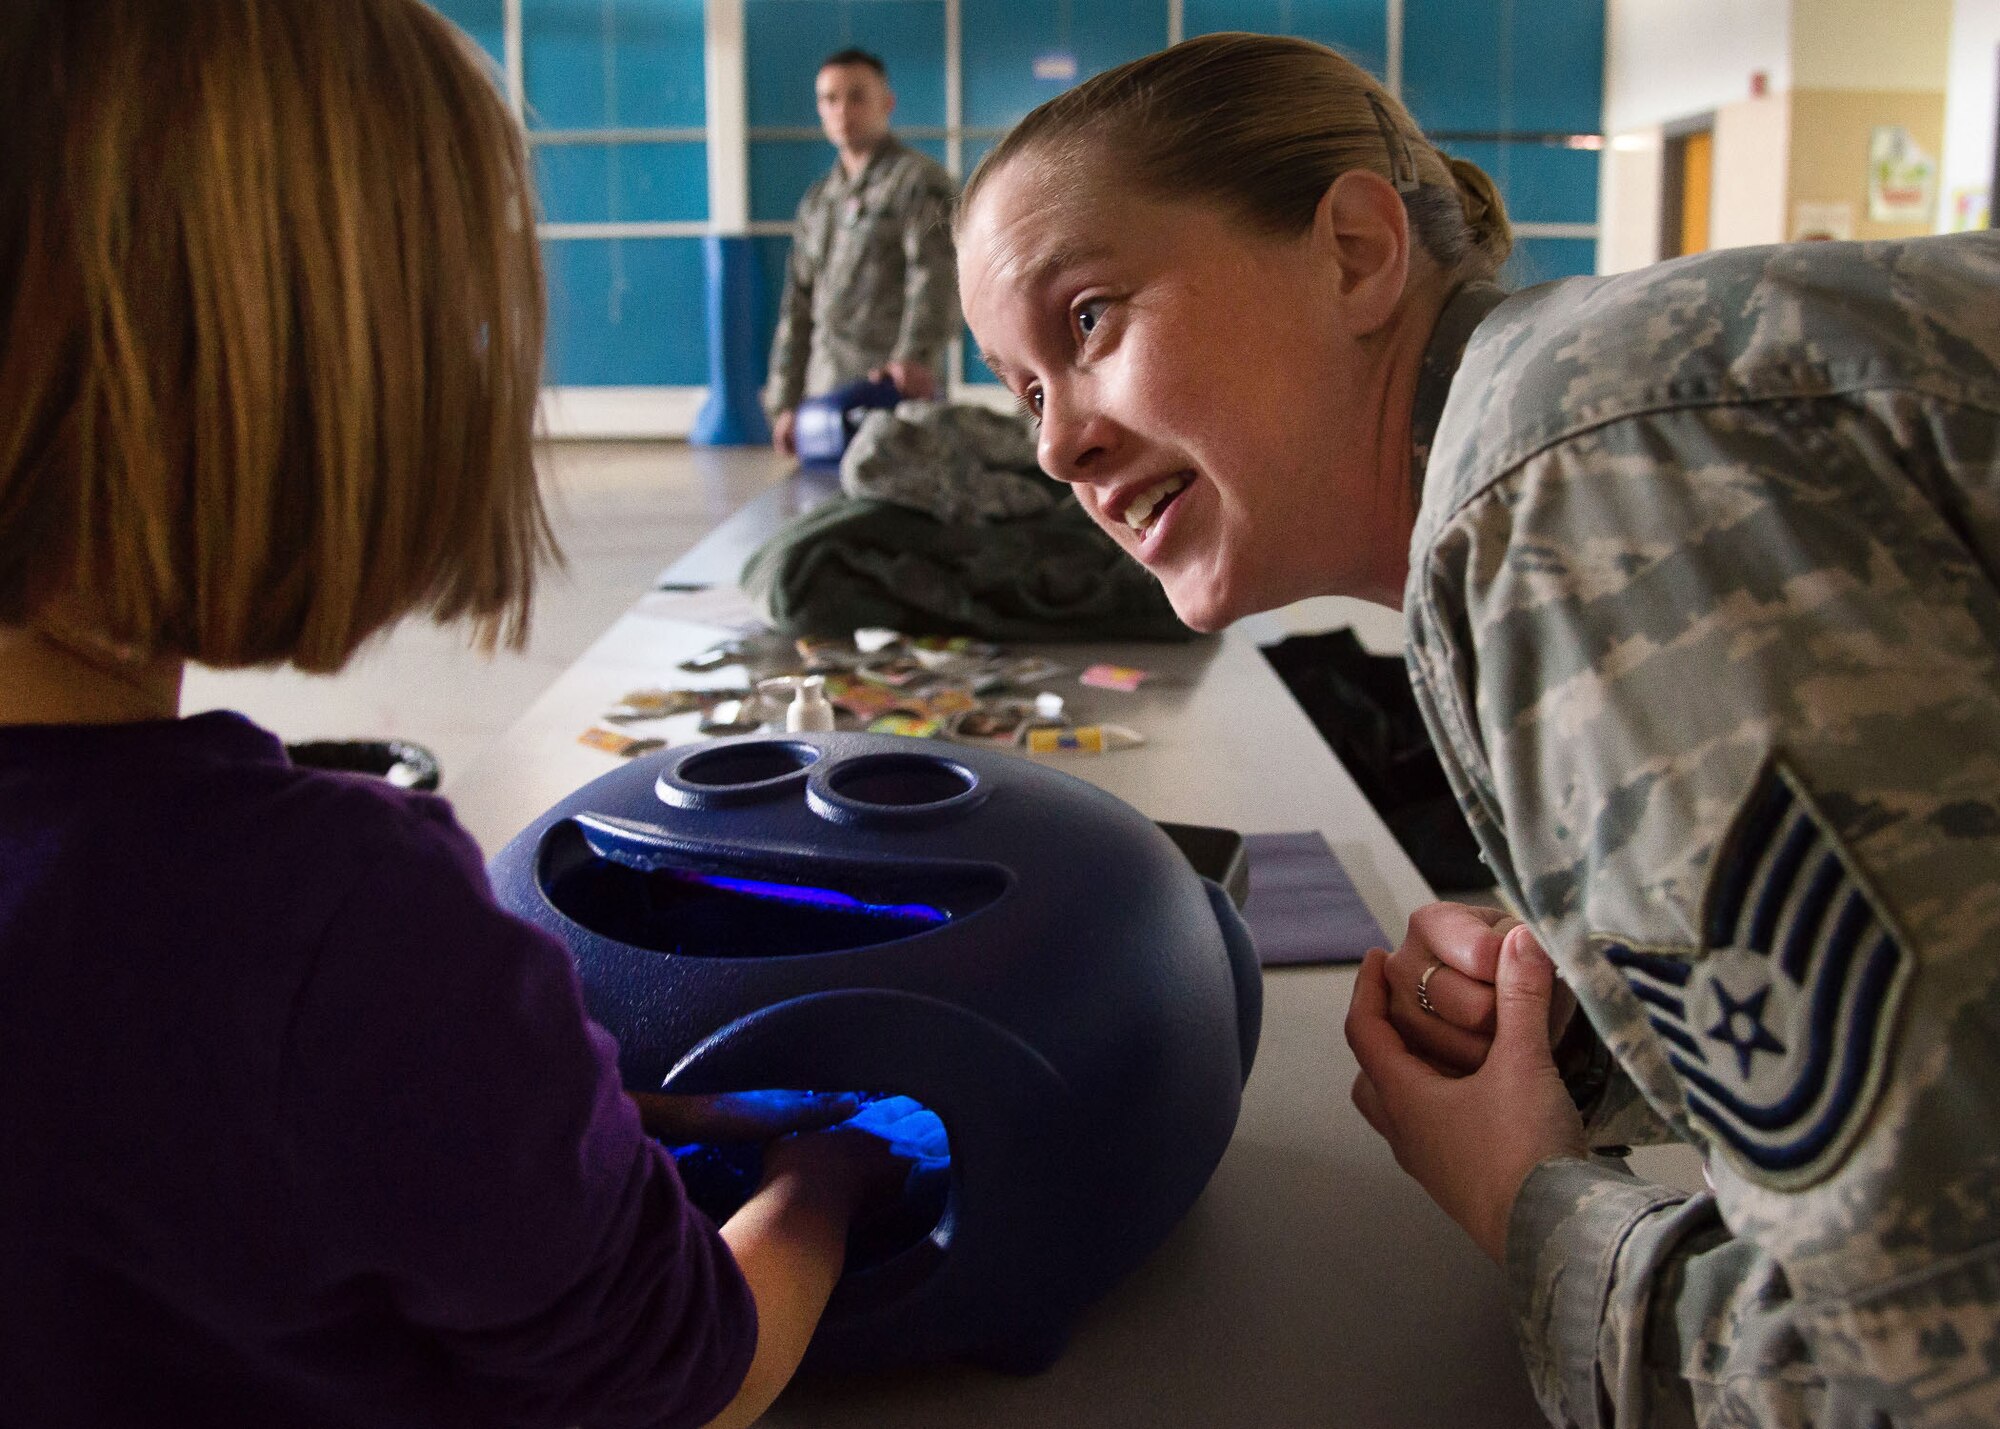 Tech. Sgt. Jennifer Maddox, 66th Medical Squadron Public Health technician, explains the importance of hand-washing to Emma Pottratz at the Hanscom Primary School April 5, 2016. Officials from the 66 MDS are encouraging the Hanscom community to practice thorough and regular hand washing to combat cold and flu season. (U.S. Air Force photo by Mark Herlihy)